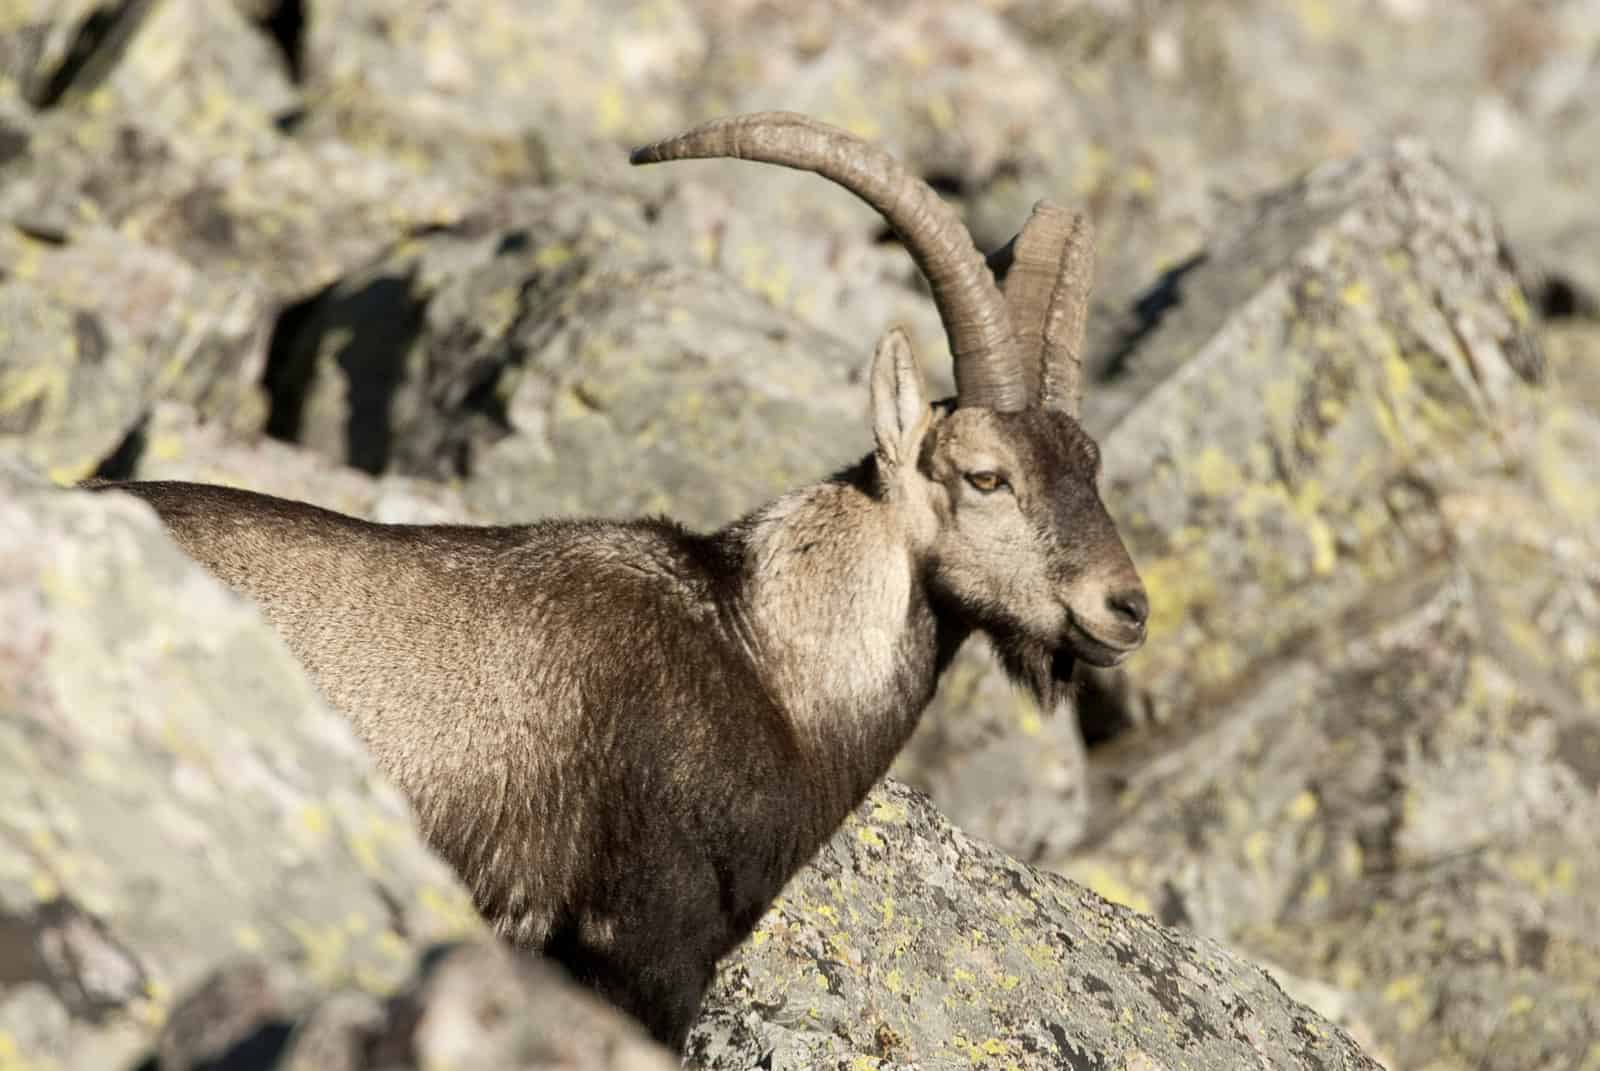 Pyrenean Ibex: The Extinct Spanish Wild Goat That Scientists Tried to Clone